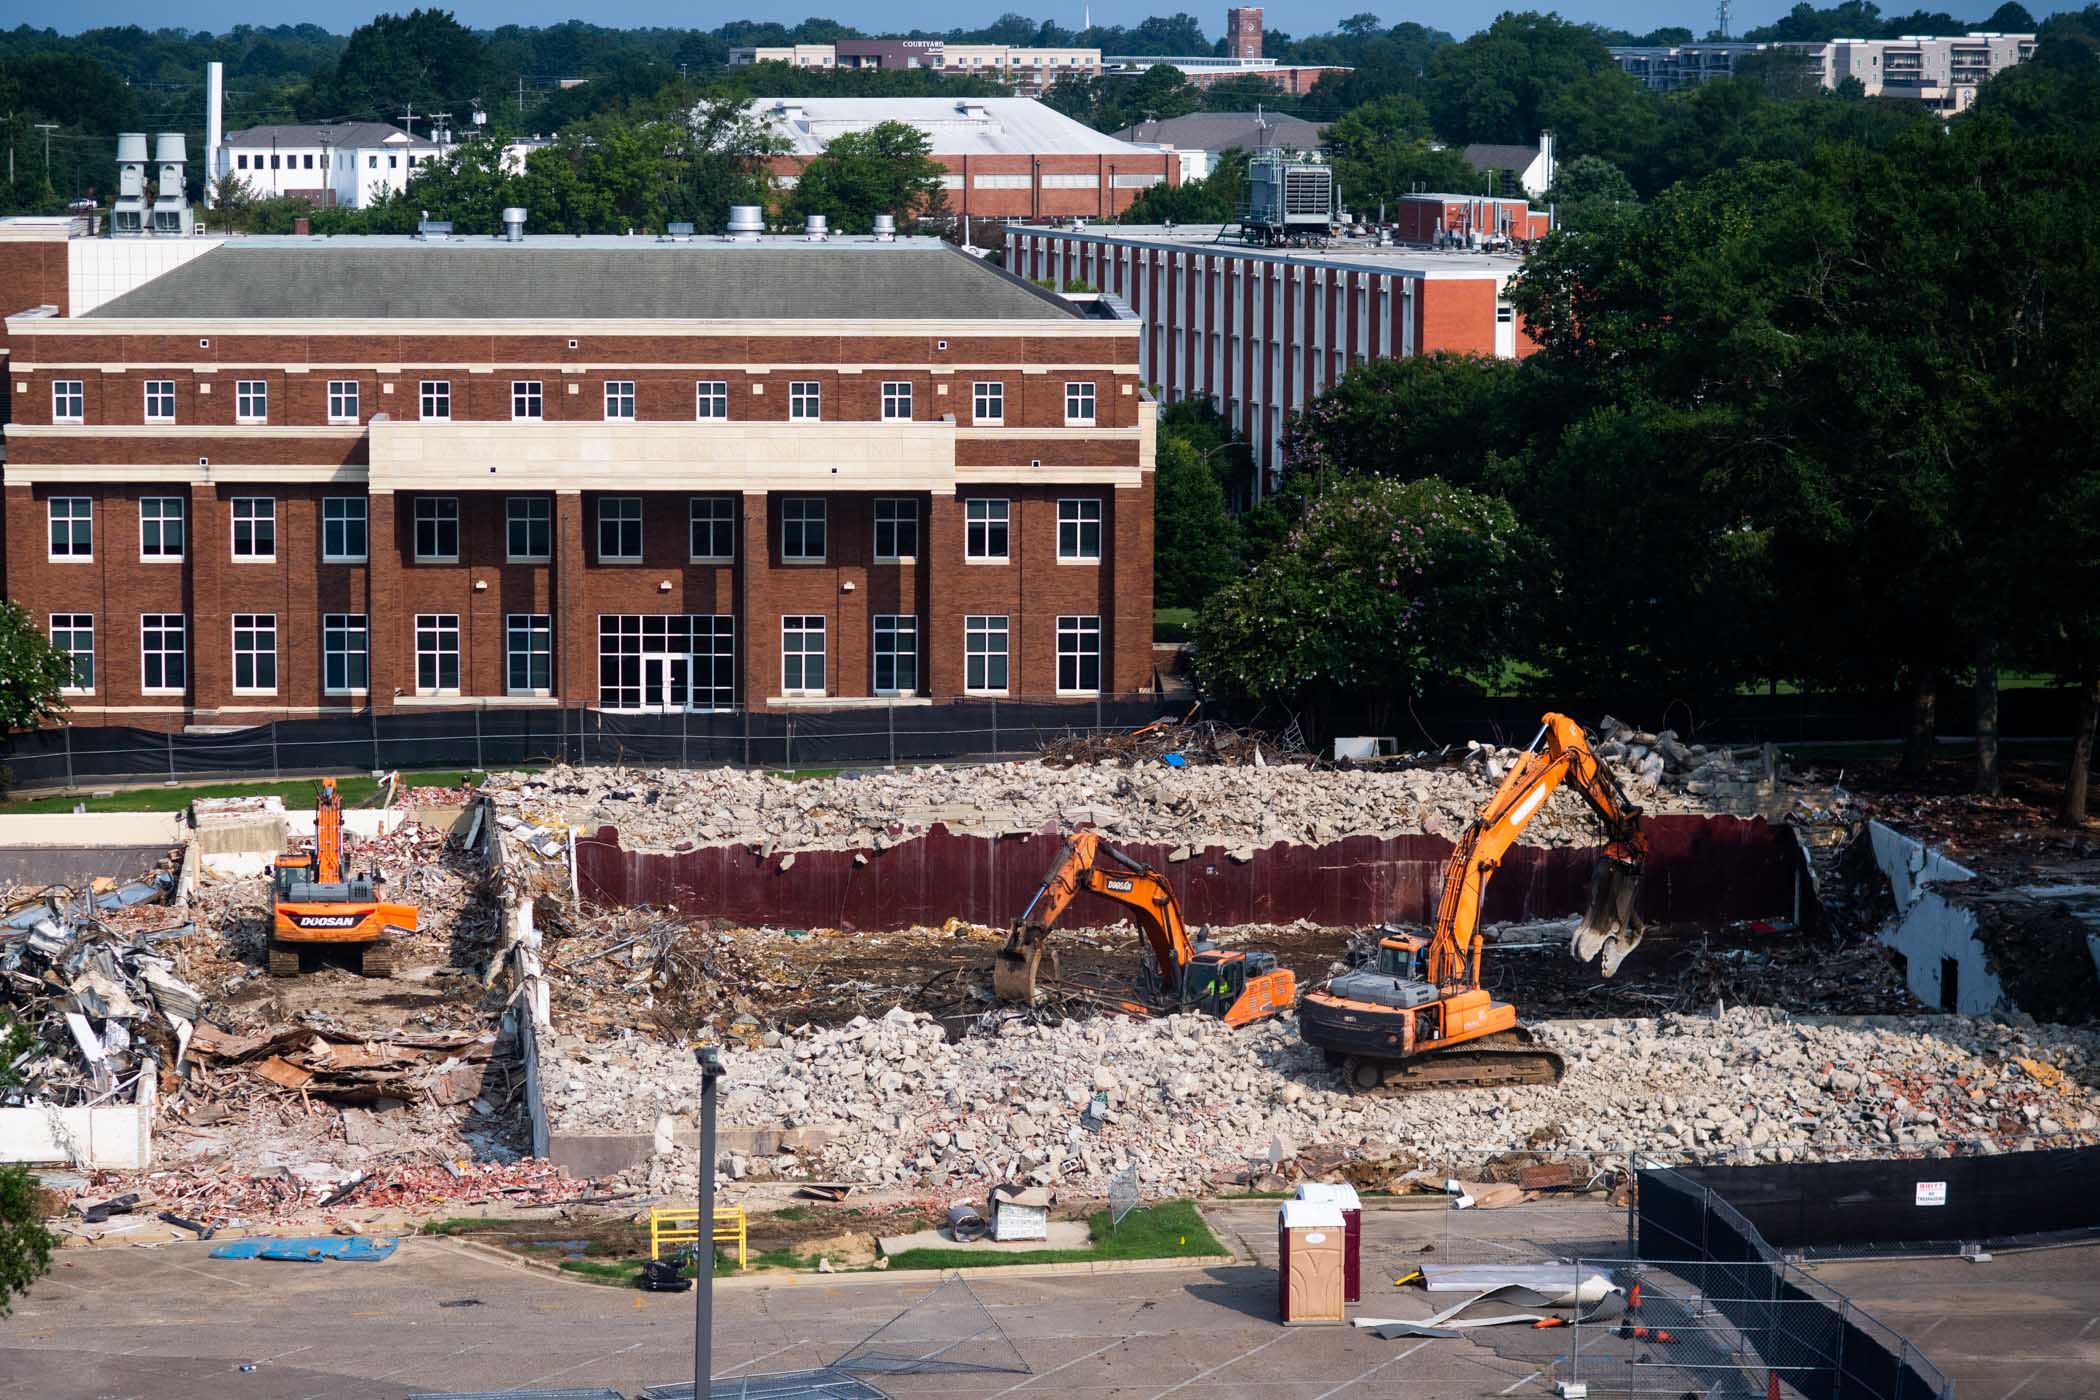 Looking down on the site of the former McCarthy Gym, with views to the Ag &amp; Bio Building, Dorman Hall, and all the way to the Mill&#039;s tower.  Massive orange excavators work to remove the remnants of McCarthy Gym in the foreground.